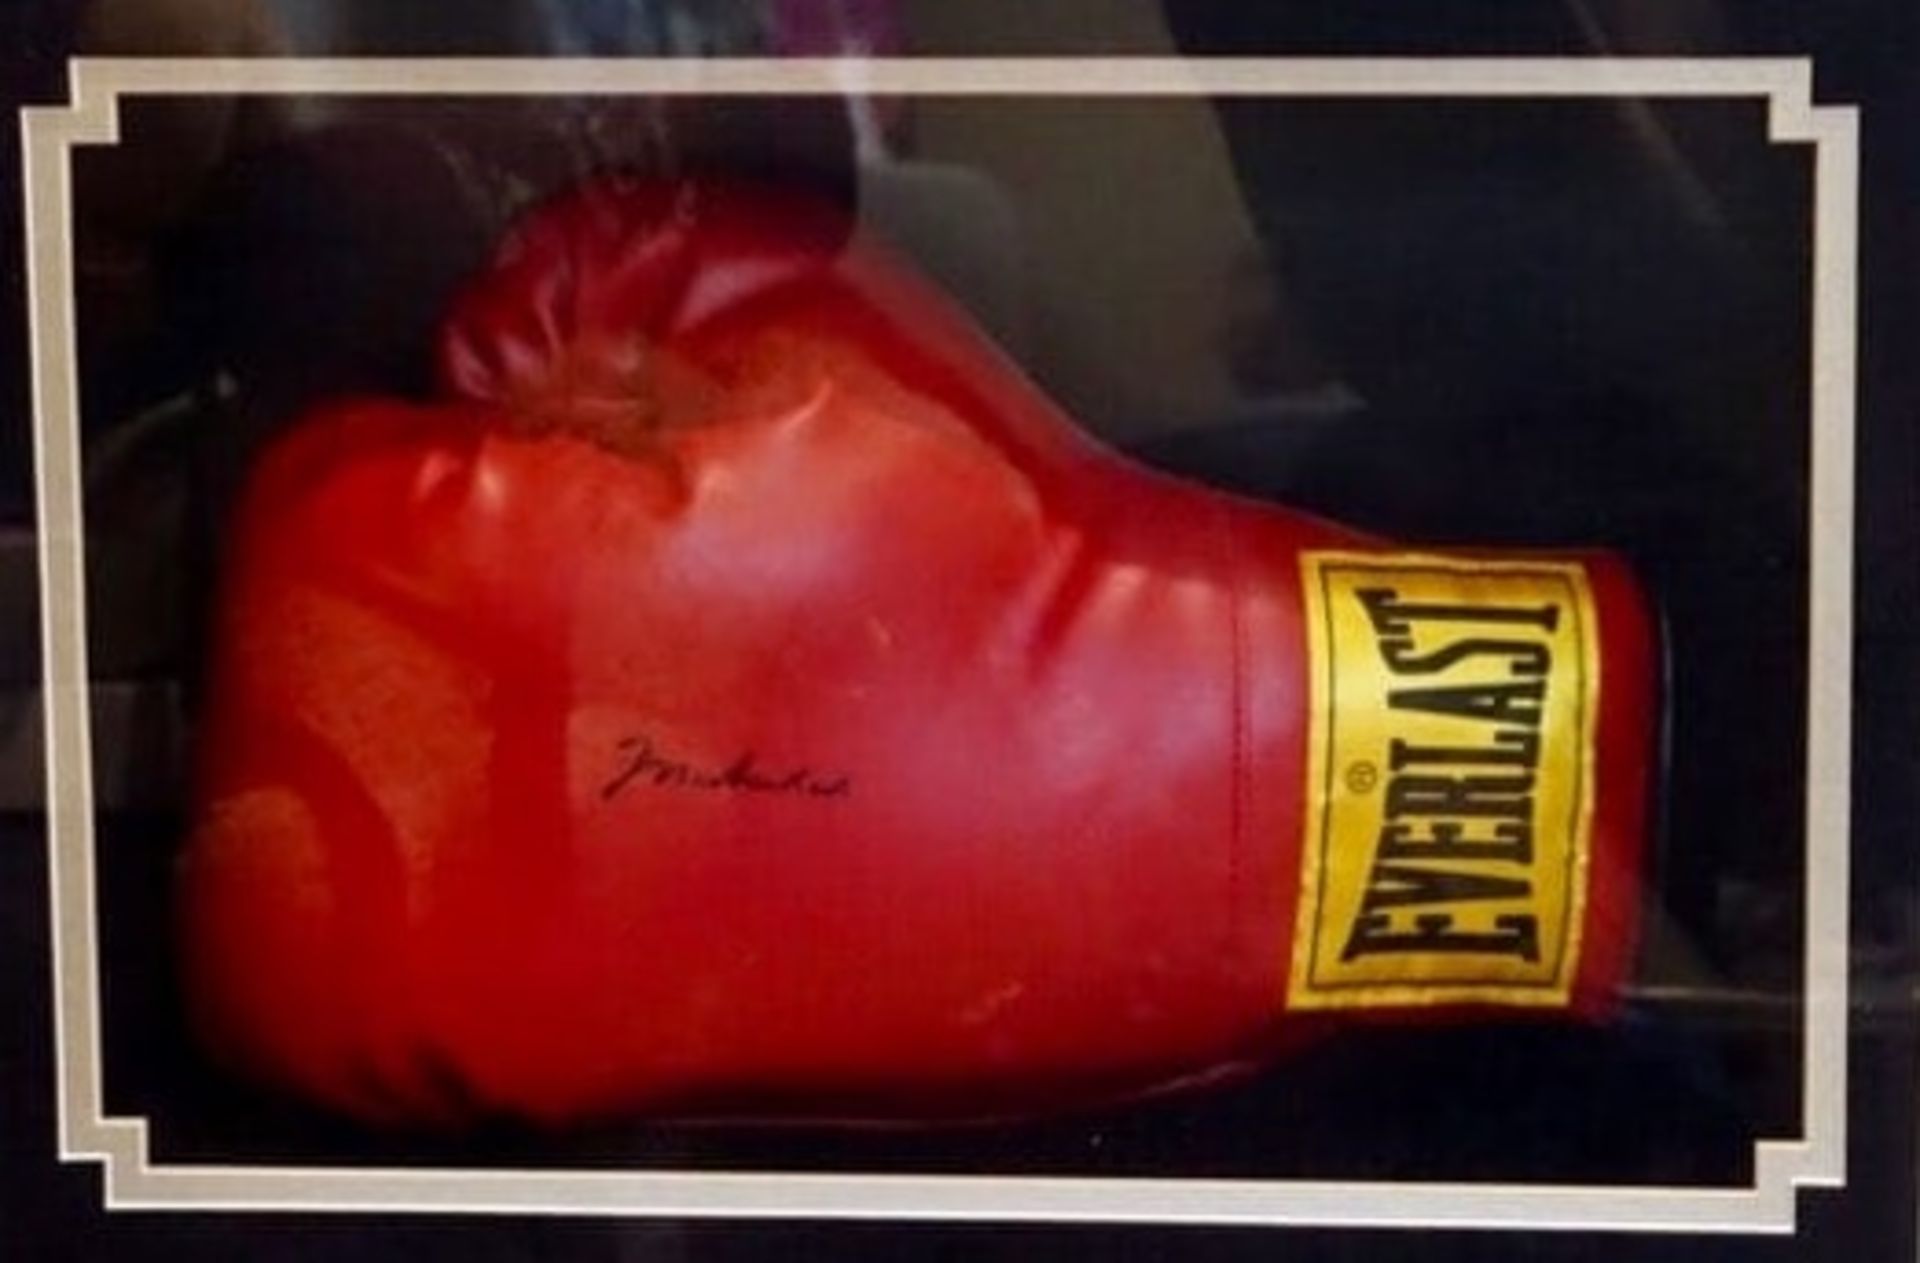 1 x Signed Muhammad Ali Boxing Glove - Mounted in Framed Display Case With Certificate of - Image 5 of 5